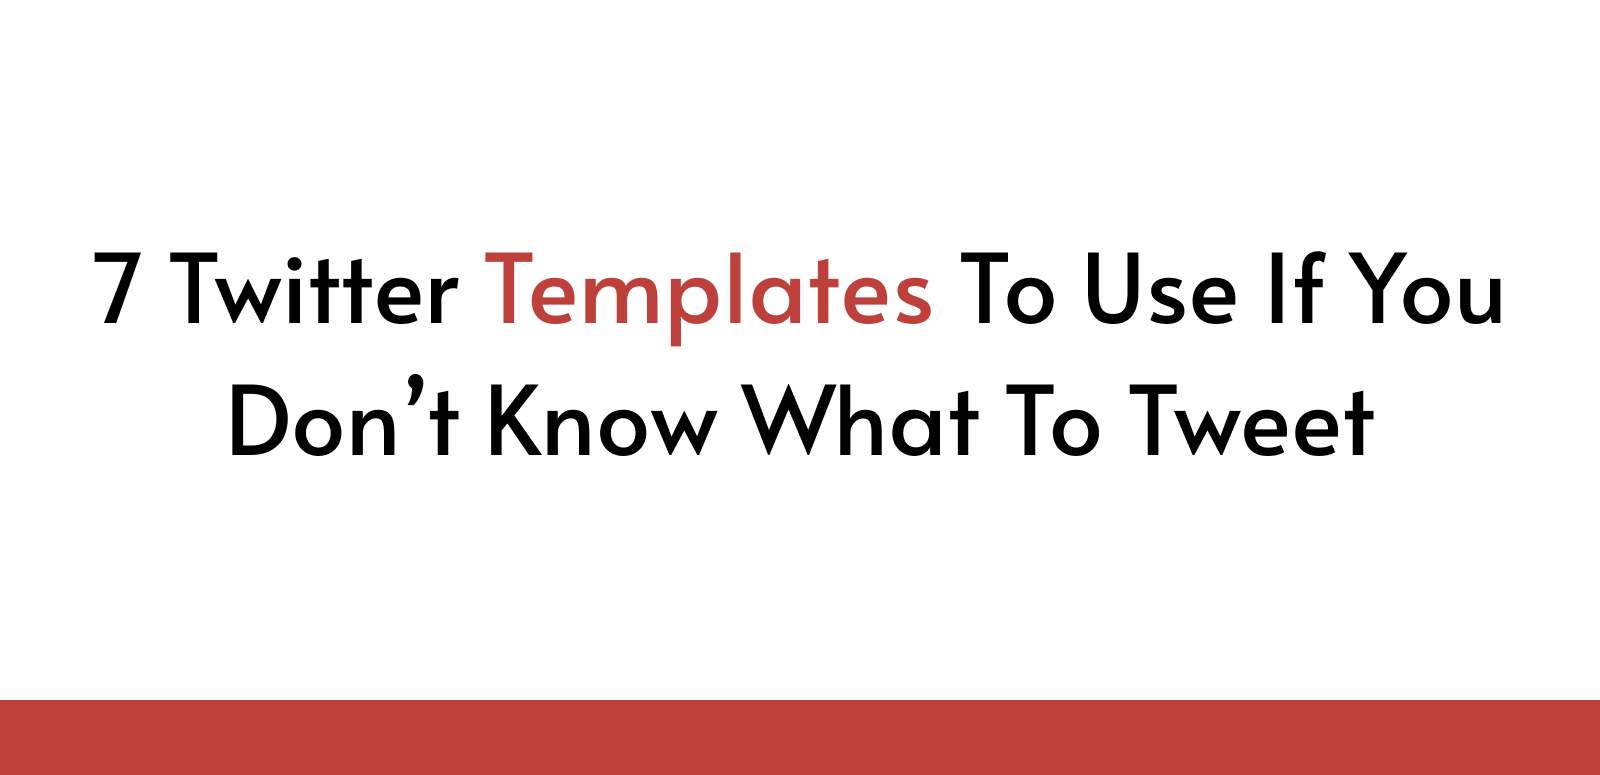 7 Twitter Templates To Use If You Don't Know What To Tweet